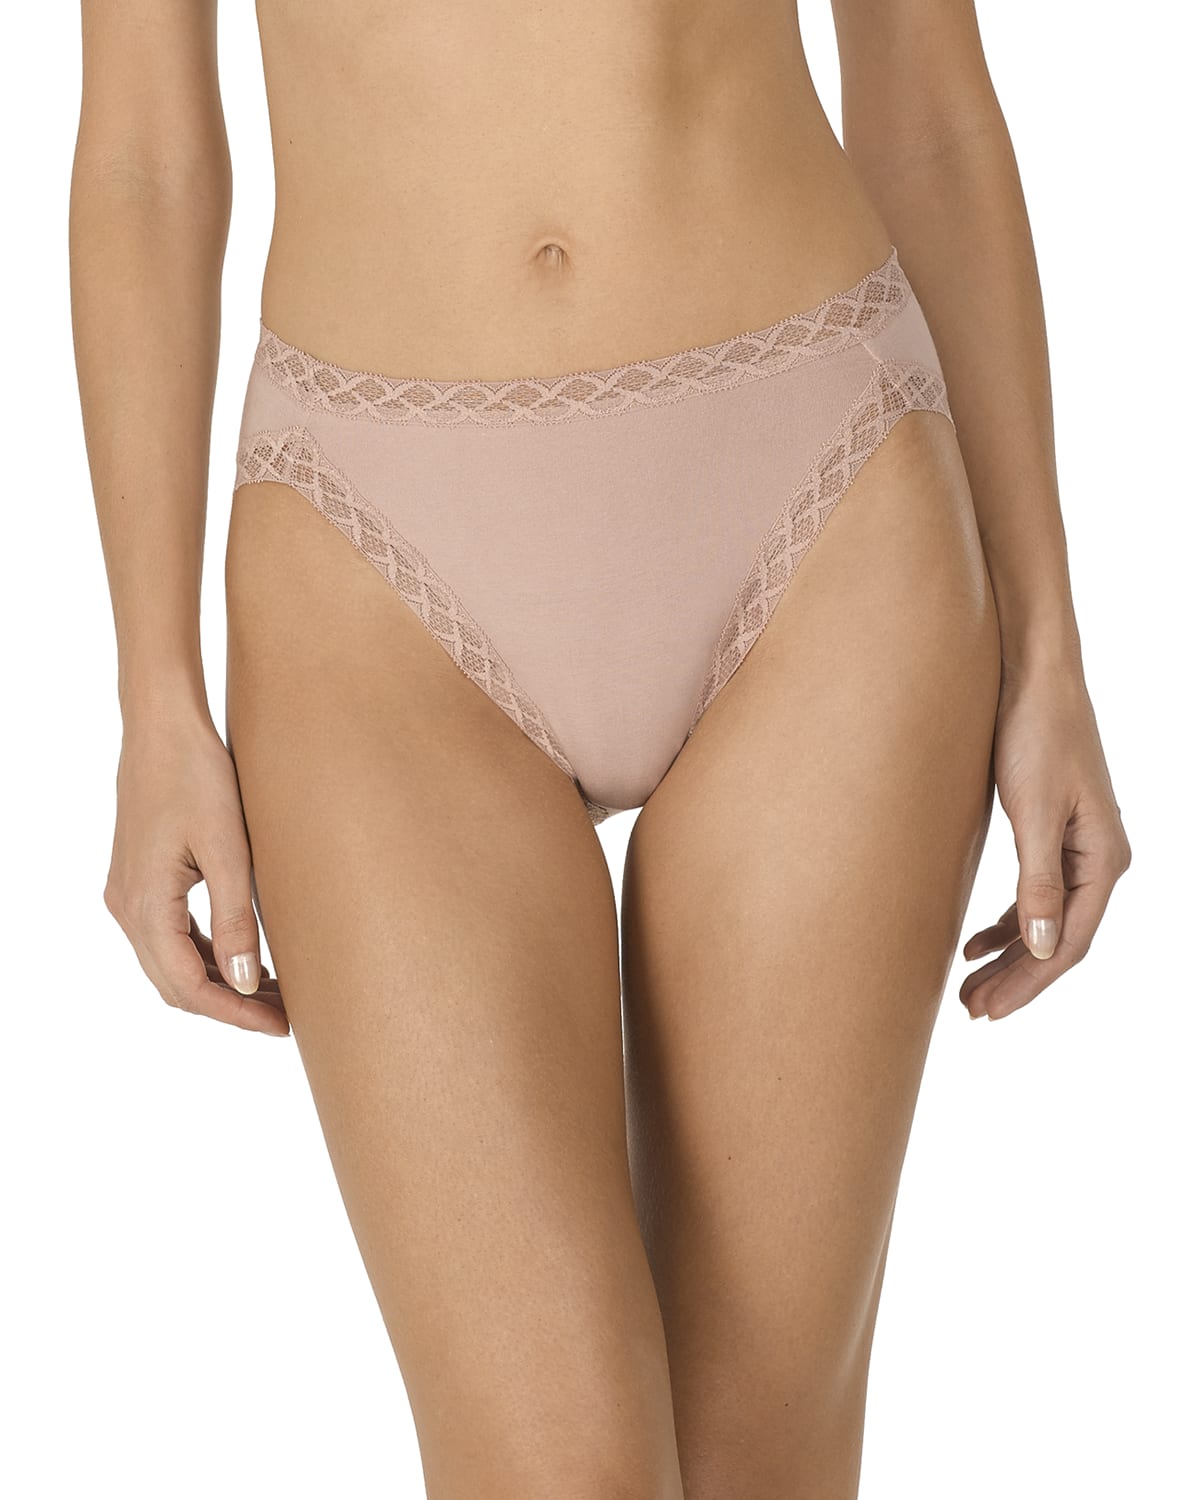 NATORI BLISS FRENCH CUT LACE TRIMMED BRIEFS